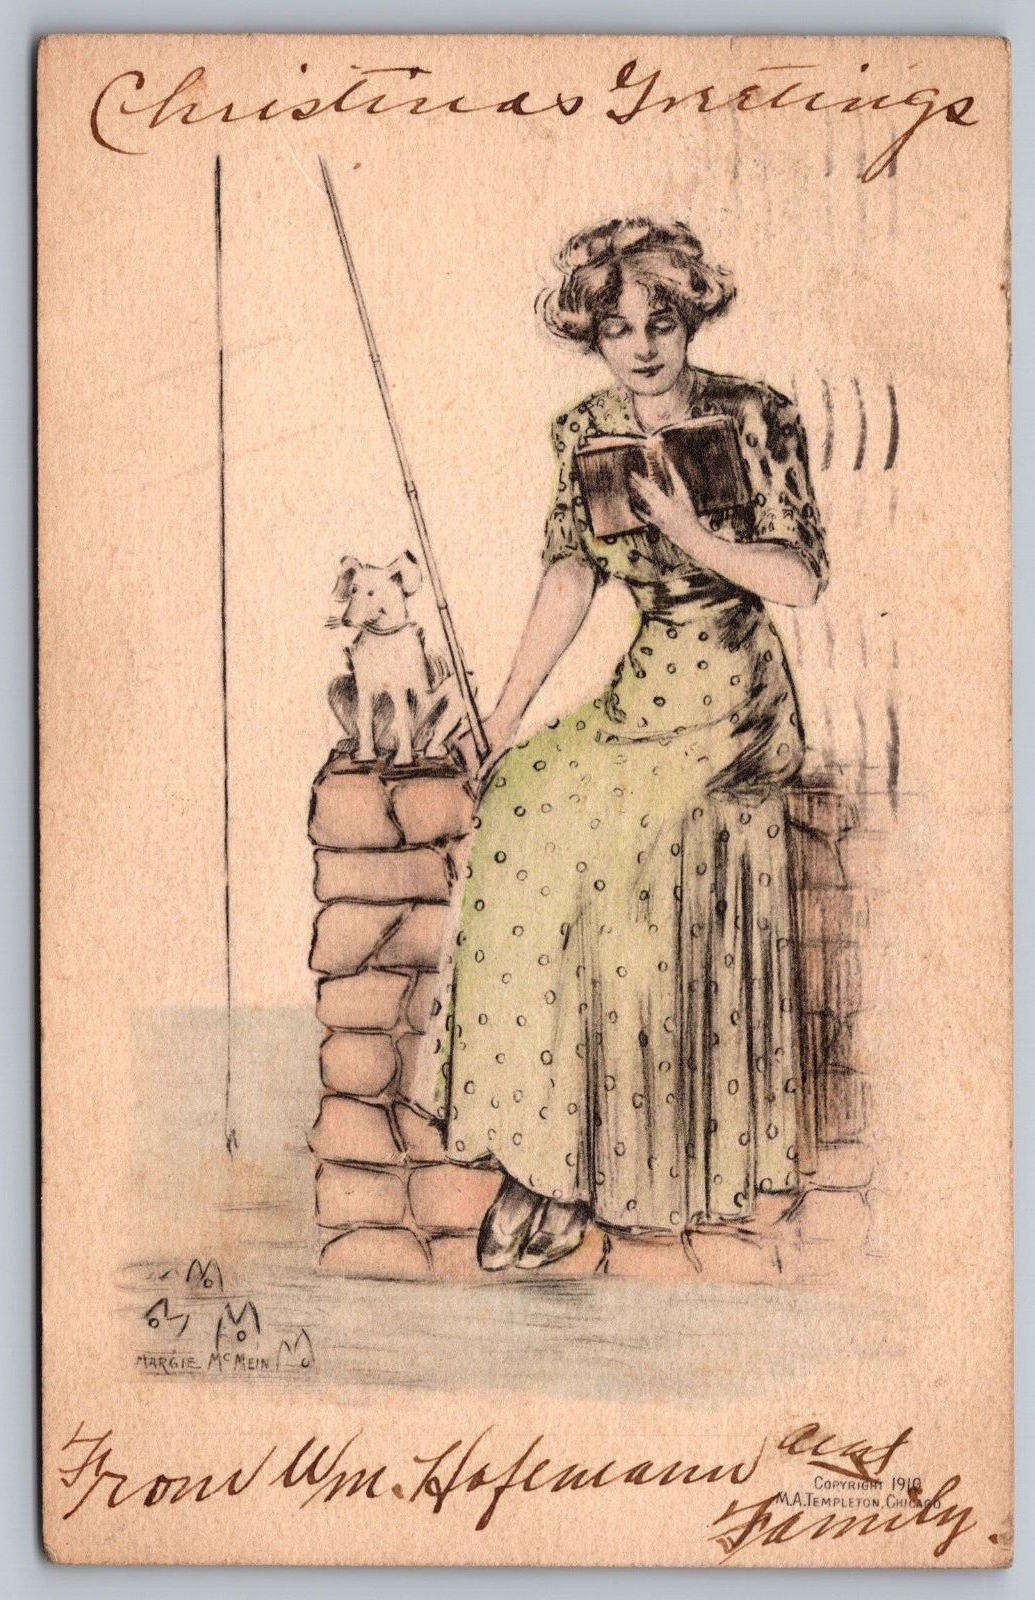 Lady Fishing With Her Dog-A/S Margie McMein (Neysa) Rare c1910 Antique Postcard